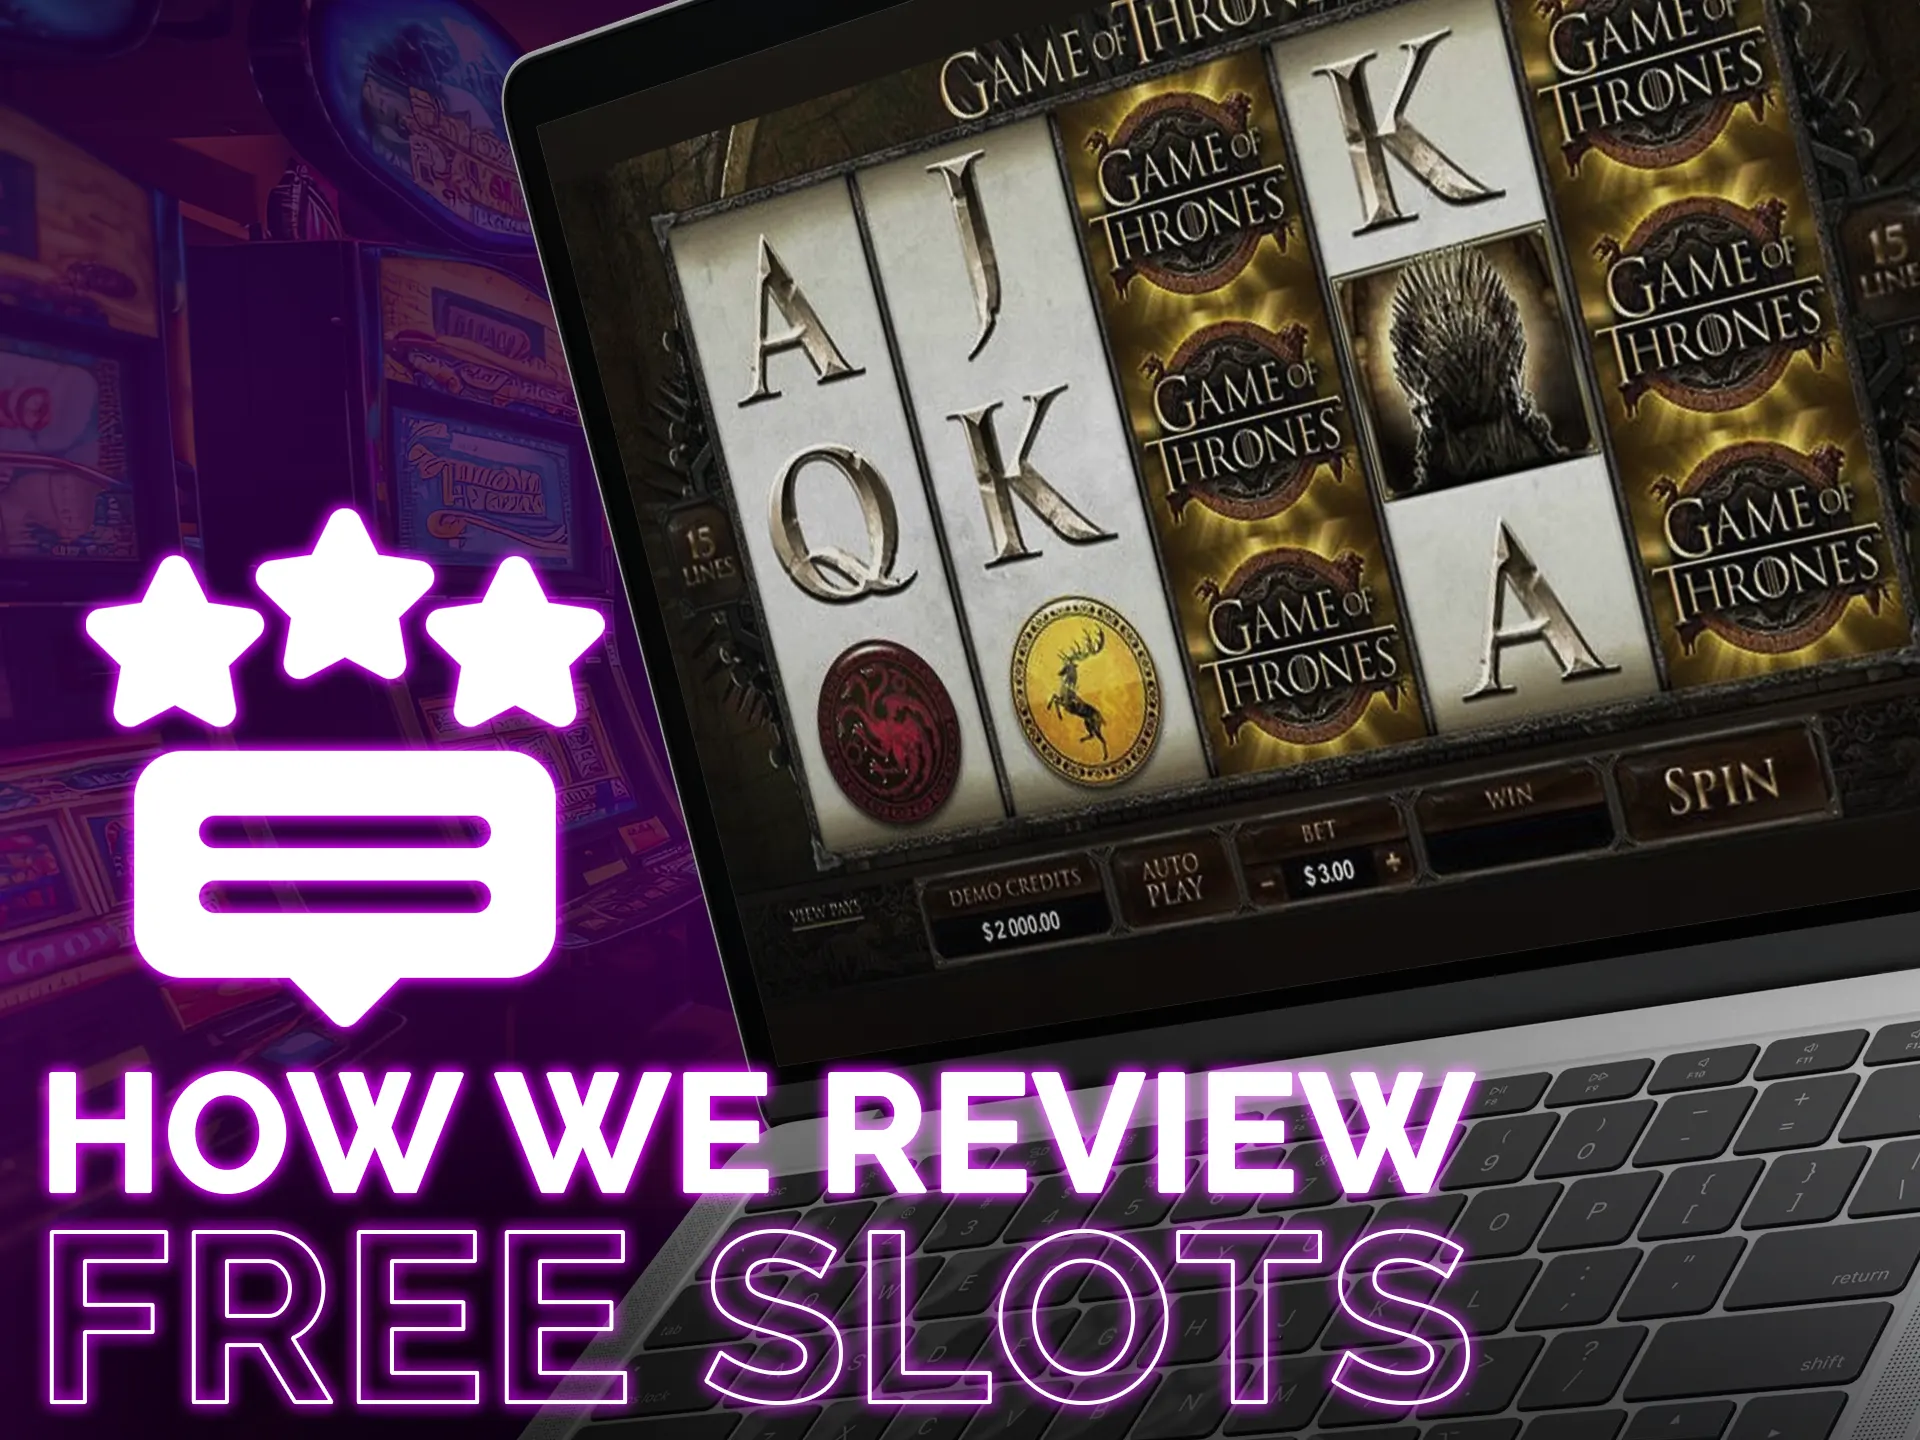 Find out about the main criteria for choosing free slots in our article.